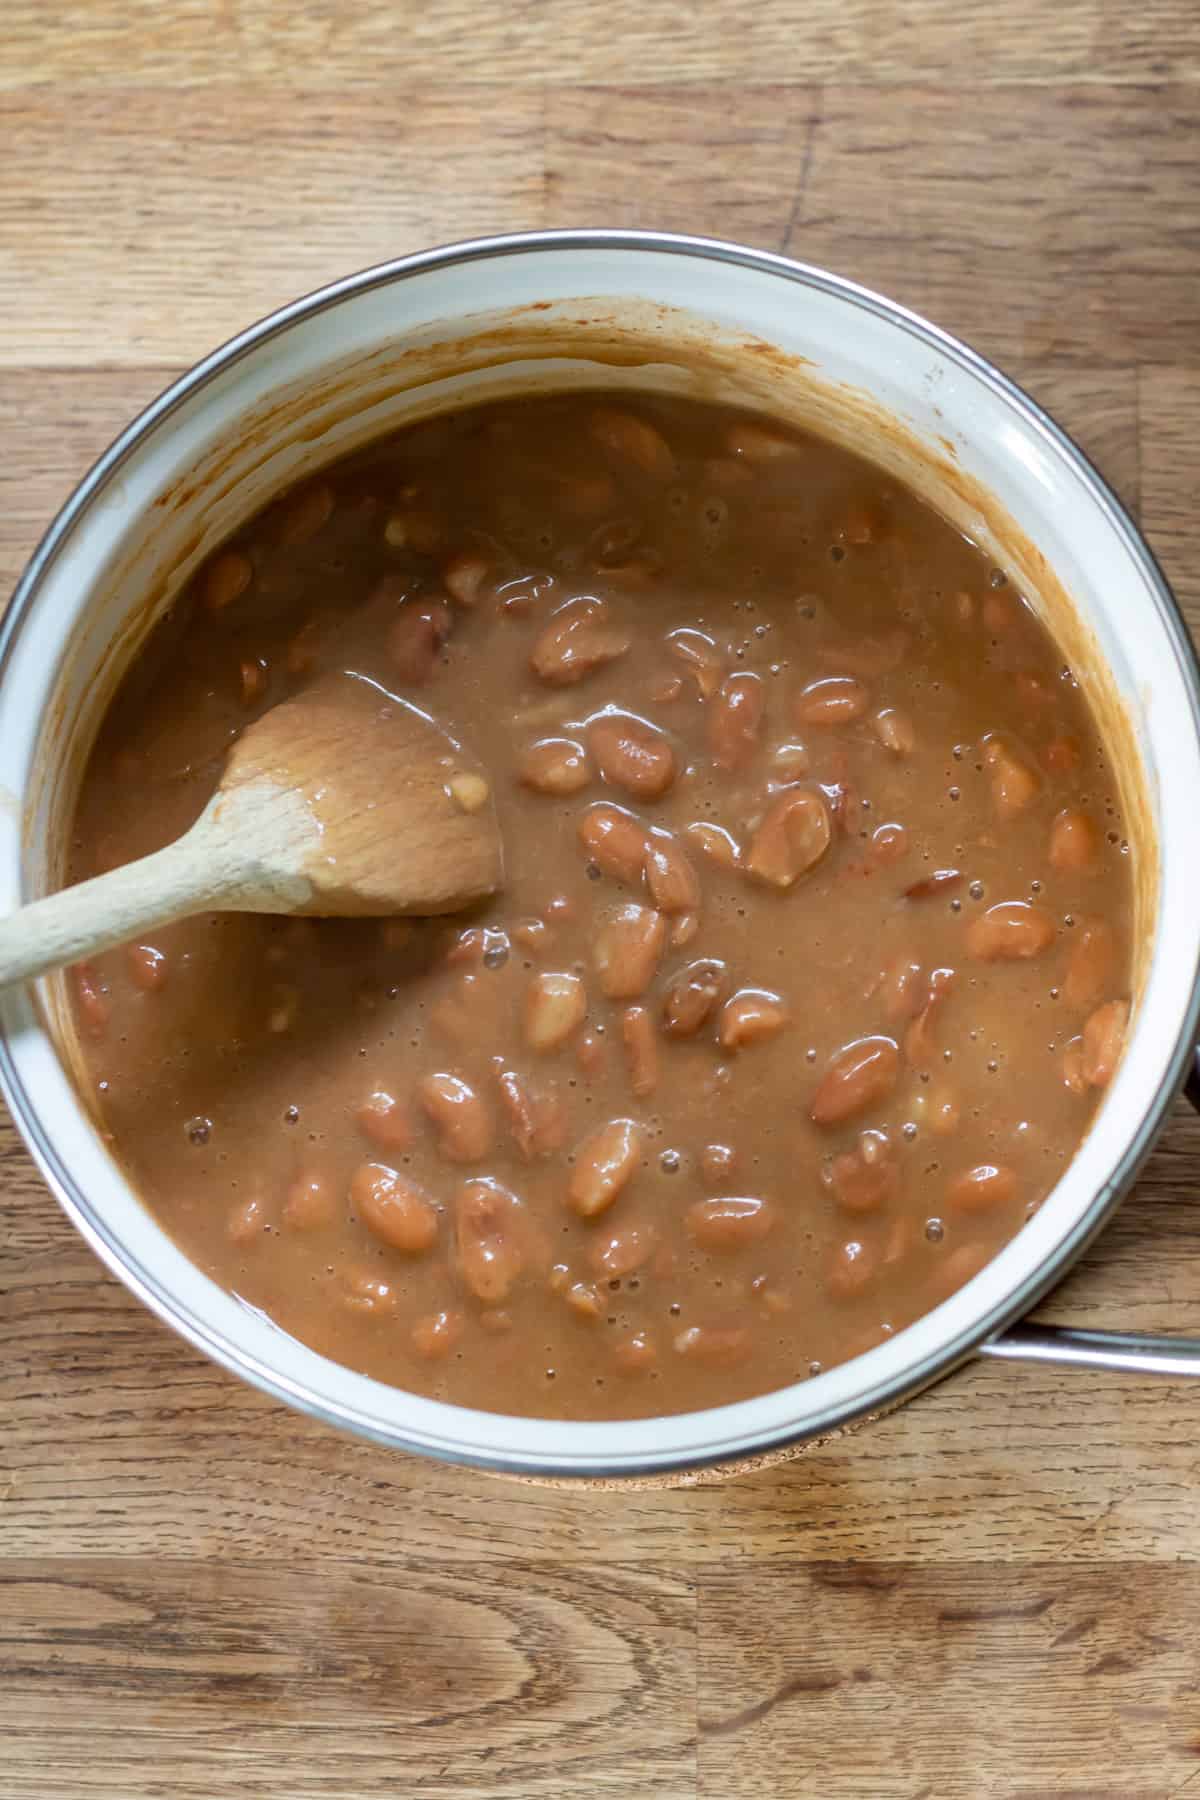 Cooked pinto beans and sauce.